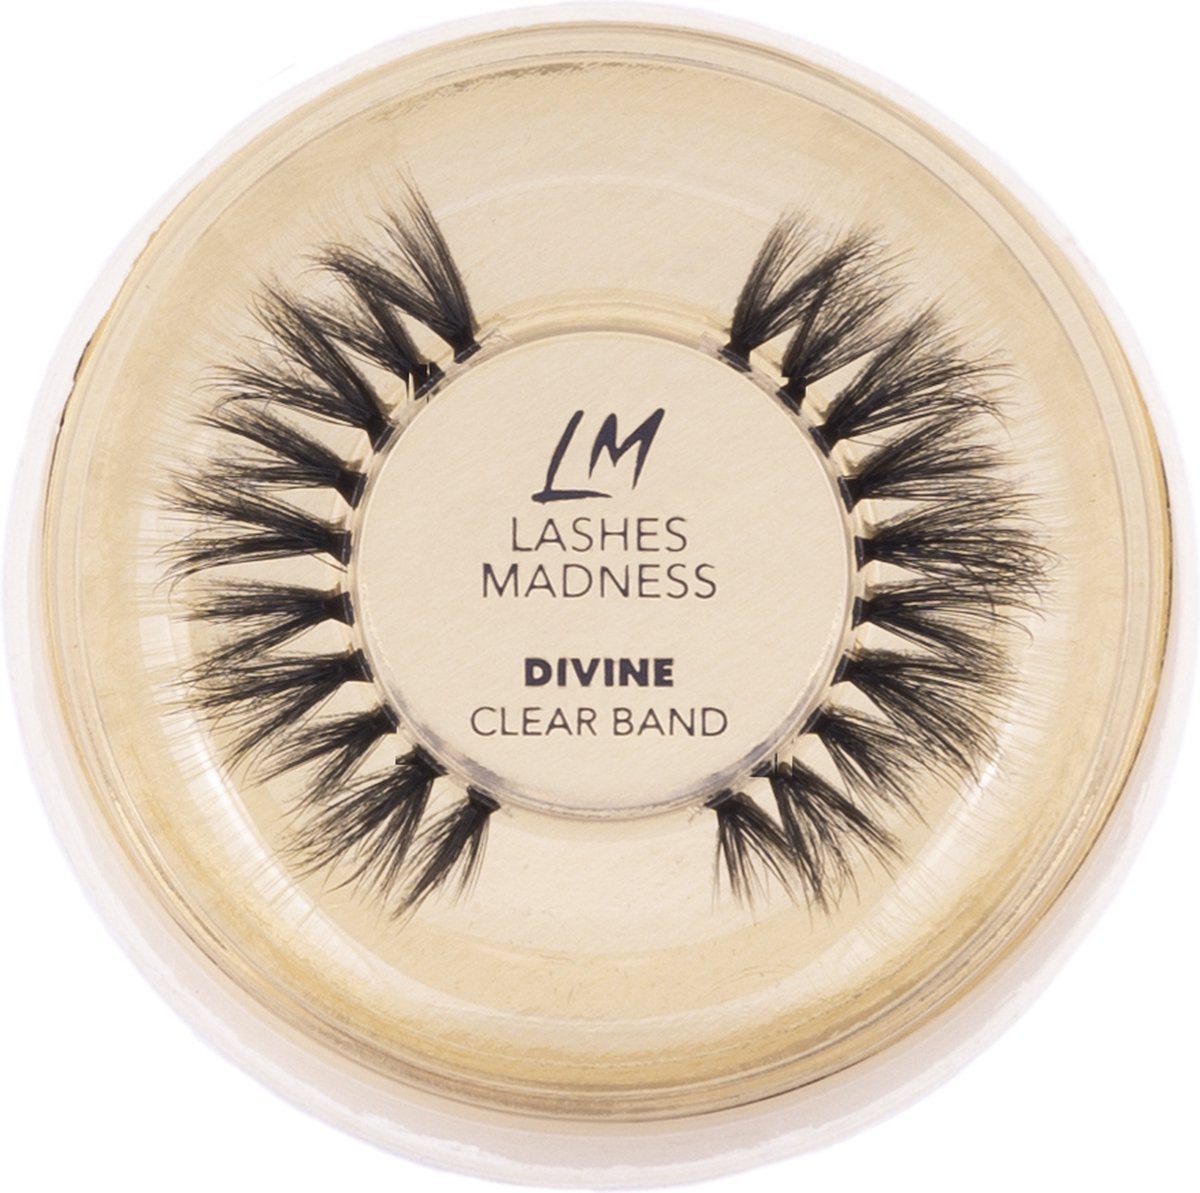 Lashes Madness - DIVINE - Clear Band - Vegan Mink Lashes - Wimpers - Valse Wimpers - Eyelashes - Luxe Wimpers